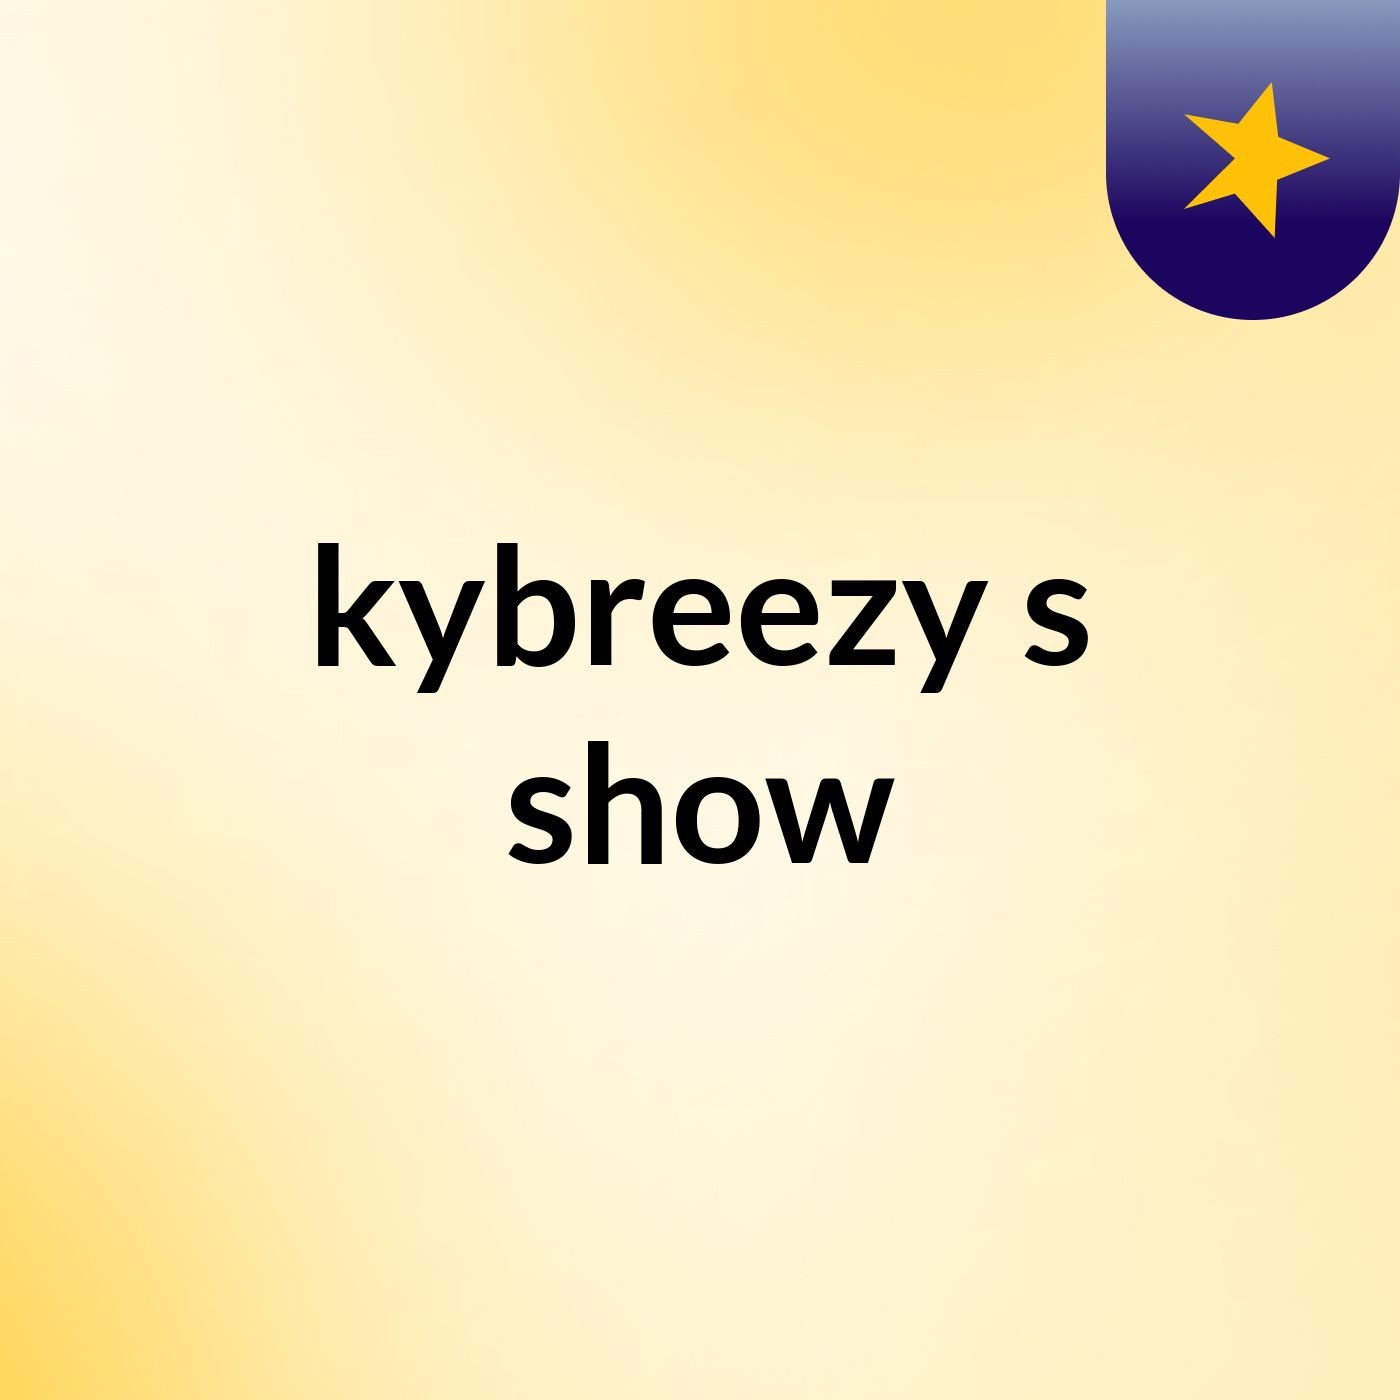 kybreezy's show